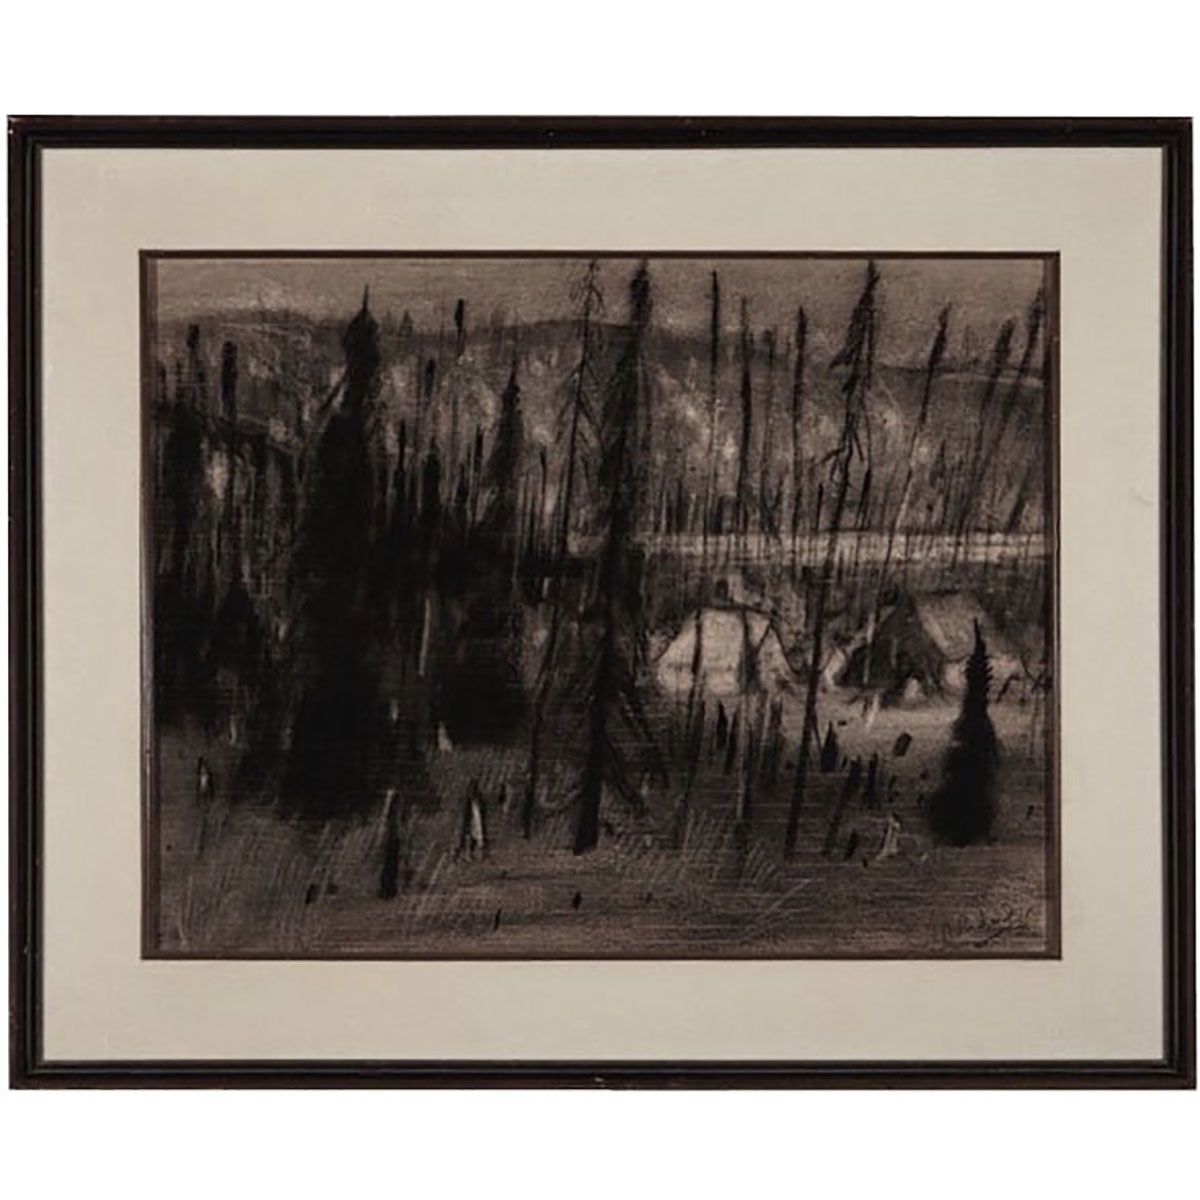 RENE RICHARD (CANADIAN, 1895-1982) CAMPEMENT INDIEN DANS LA FORET  CHARCOAL; SIGNED IN PENCIL LOWER RIGHT; TITLED AND DATED 1935 TO GALLERY LABEL VERSO (Sight, 17” x 22”) GALERIE L’ART francois, MONTREAL